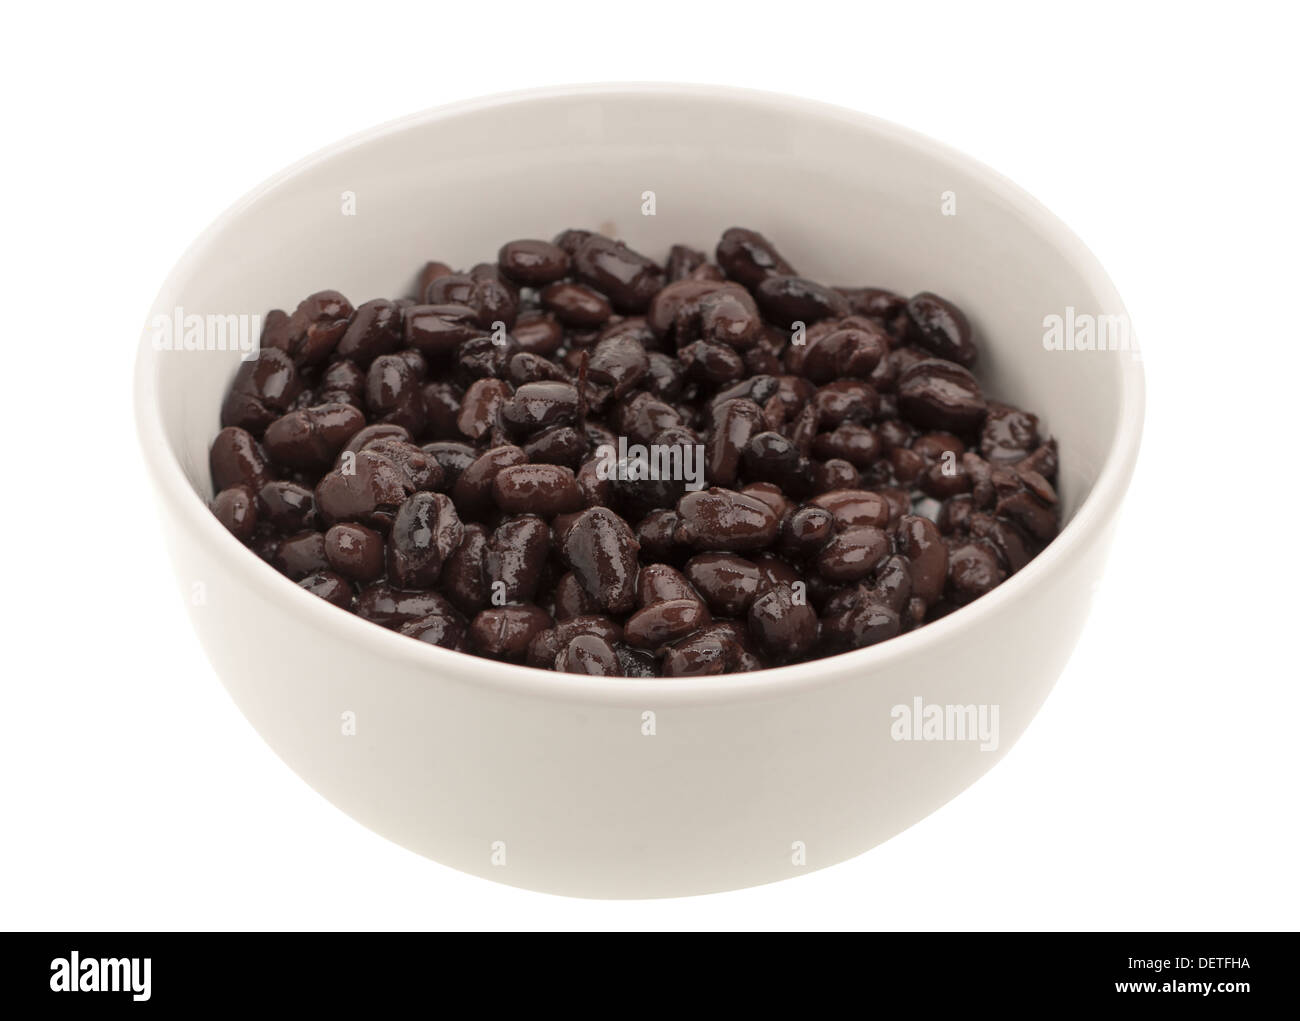 White dish full of cooked black beans Stock Photo